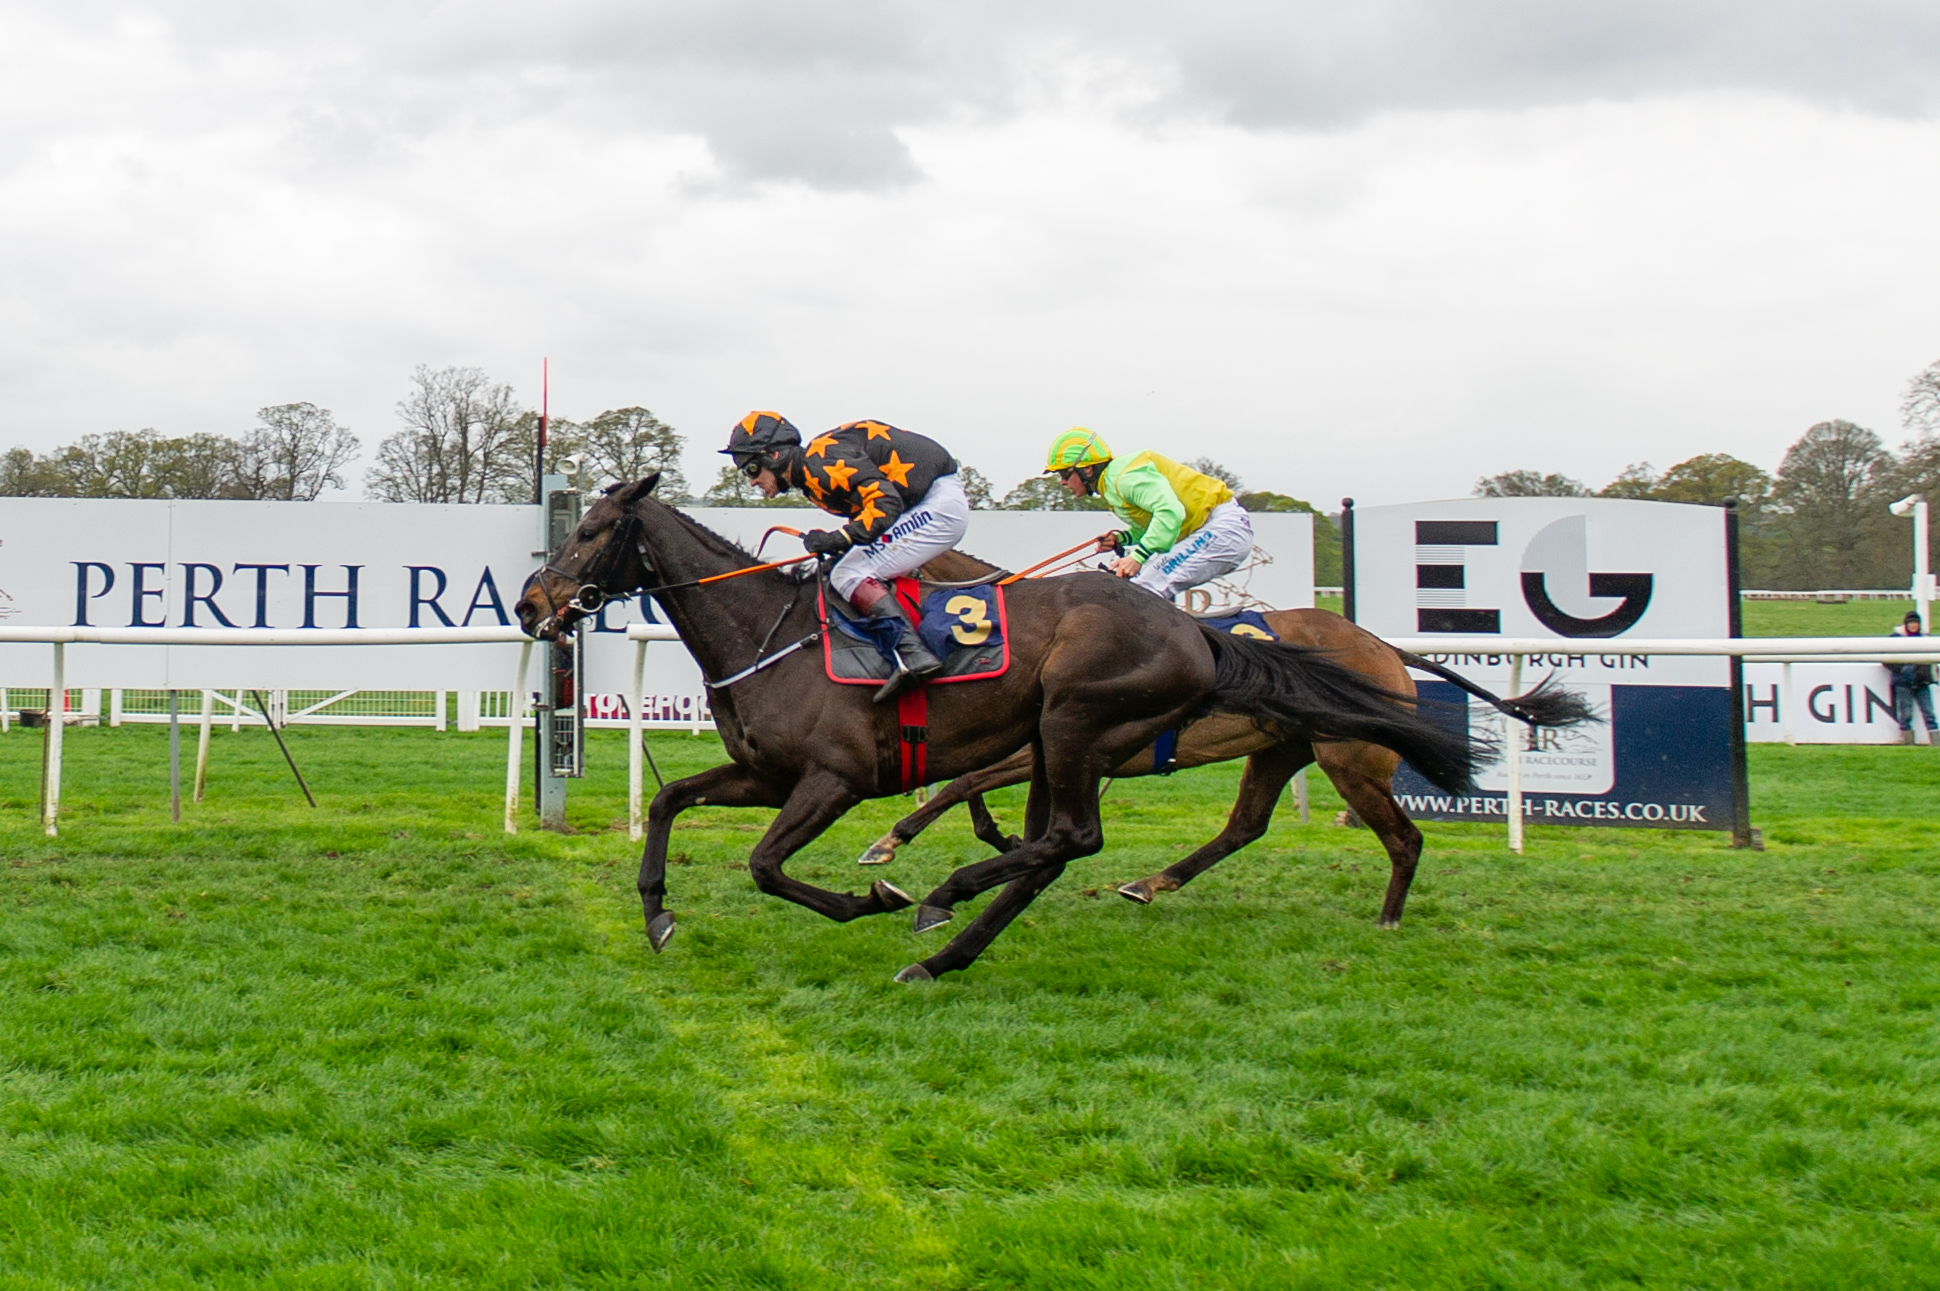 Action from the fifth race of the day.